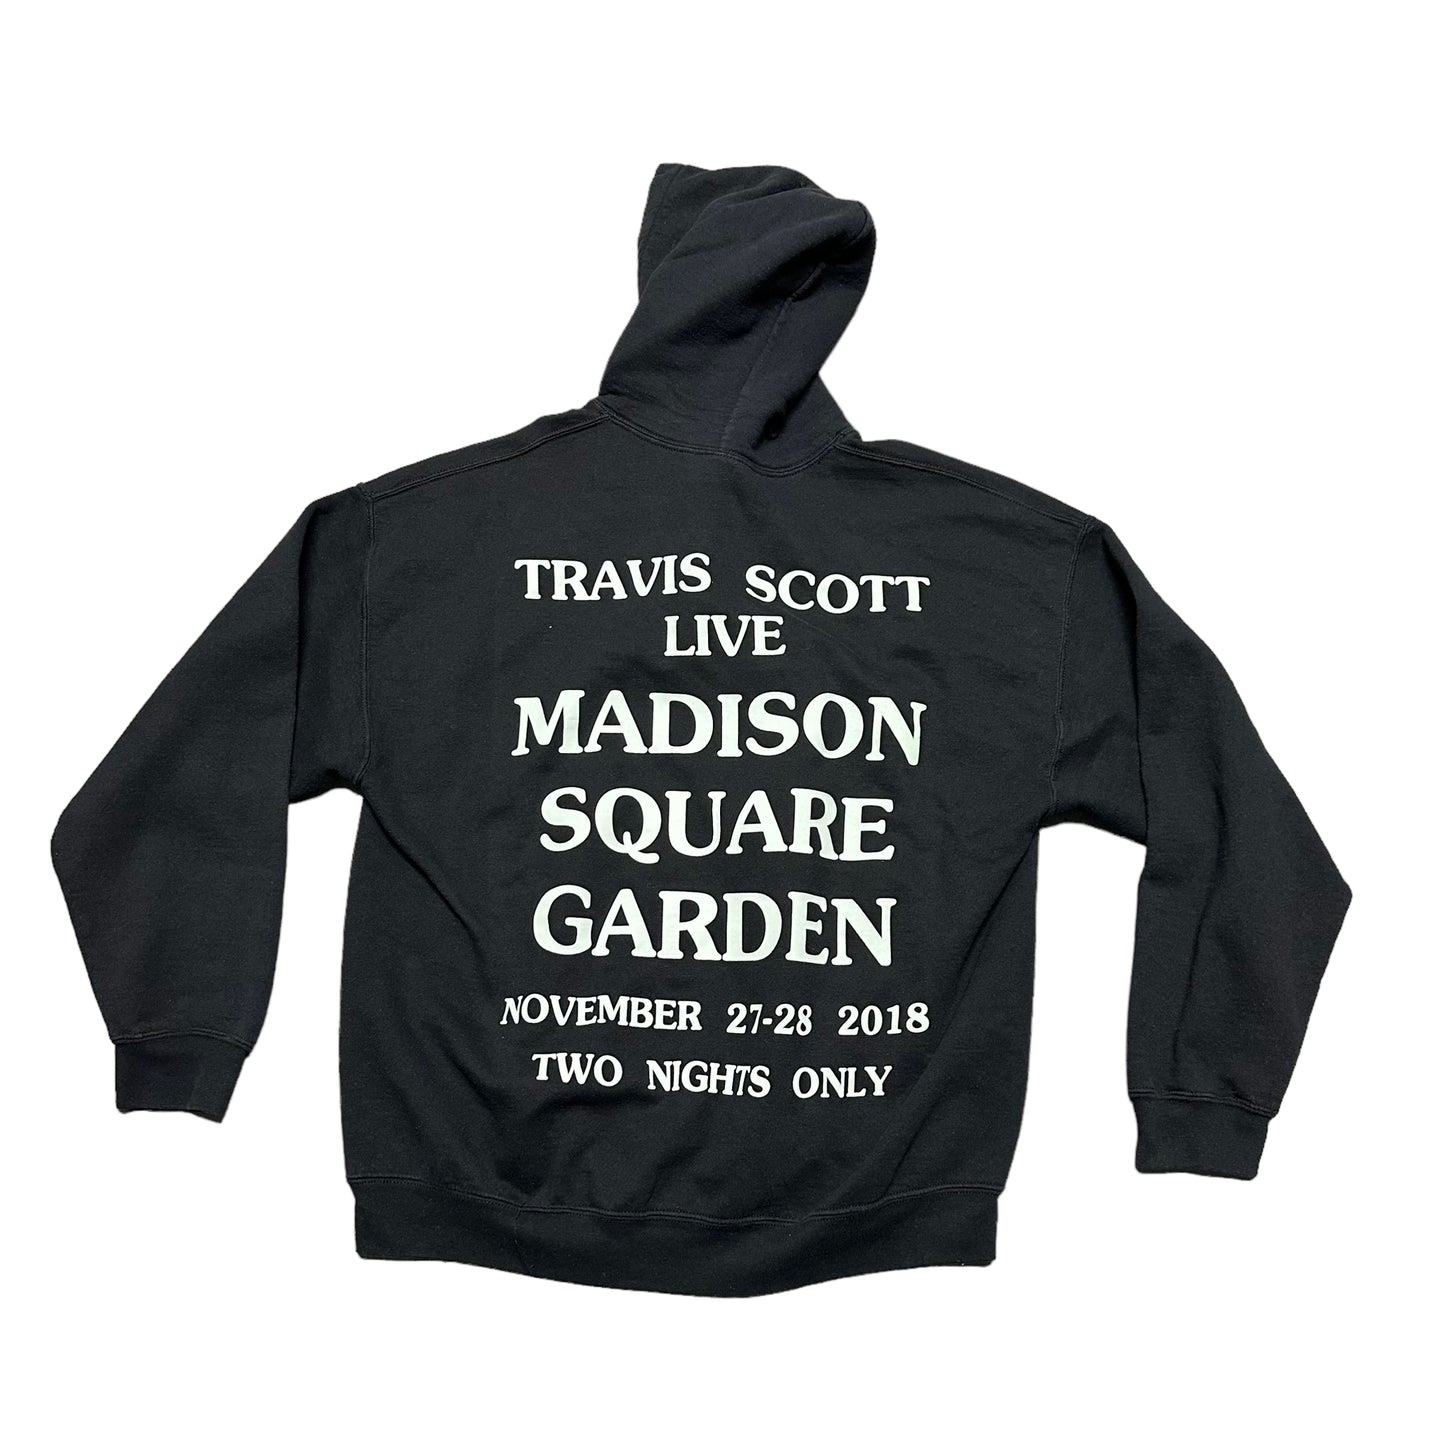 Astroworld MSG NY Statue Black Hoodie